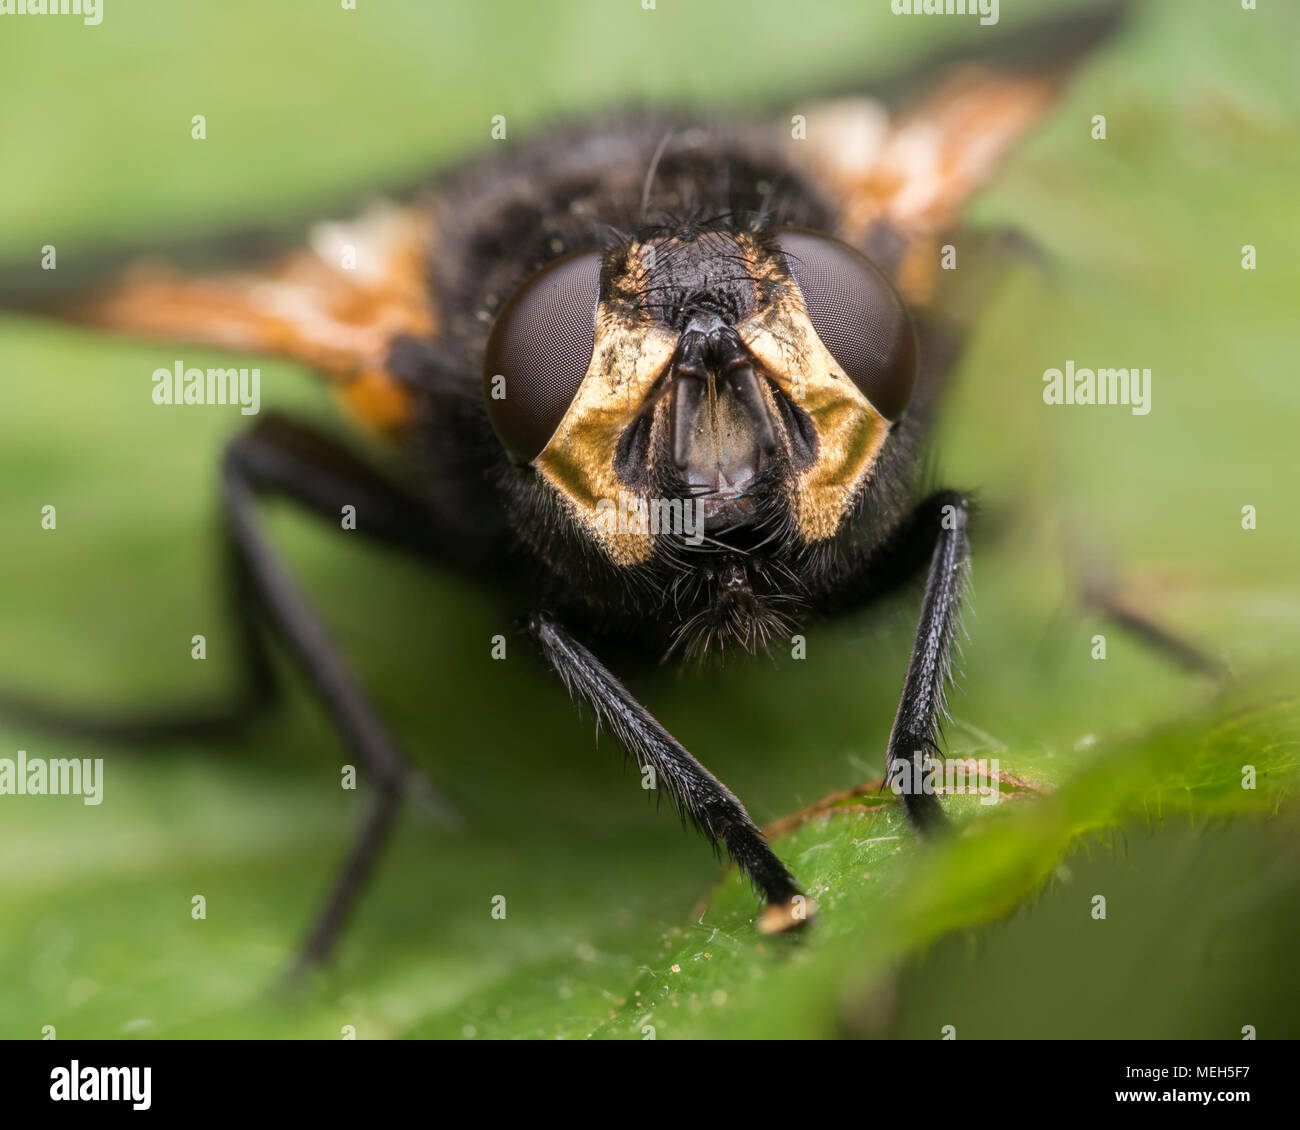 Noon Fly (Mesembrina meridiana) perched on a leaf. Frontal view of the face. Tipperary, Ireland Stock Photo